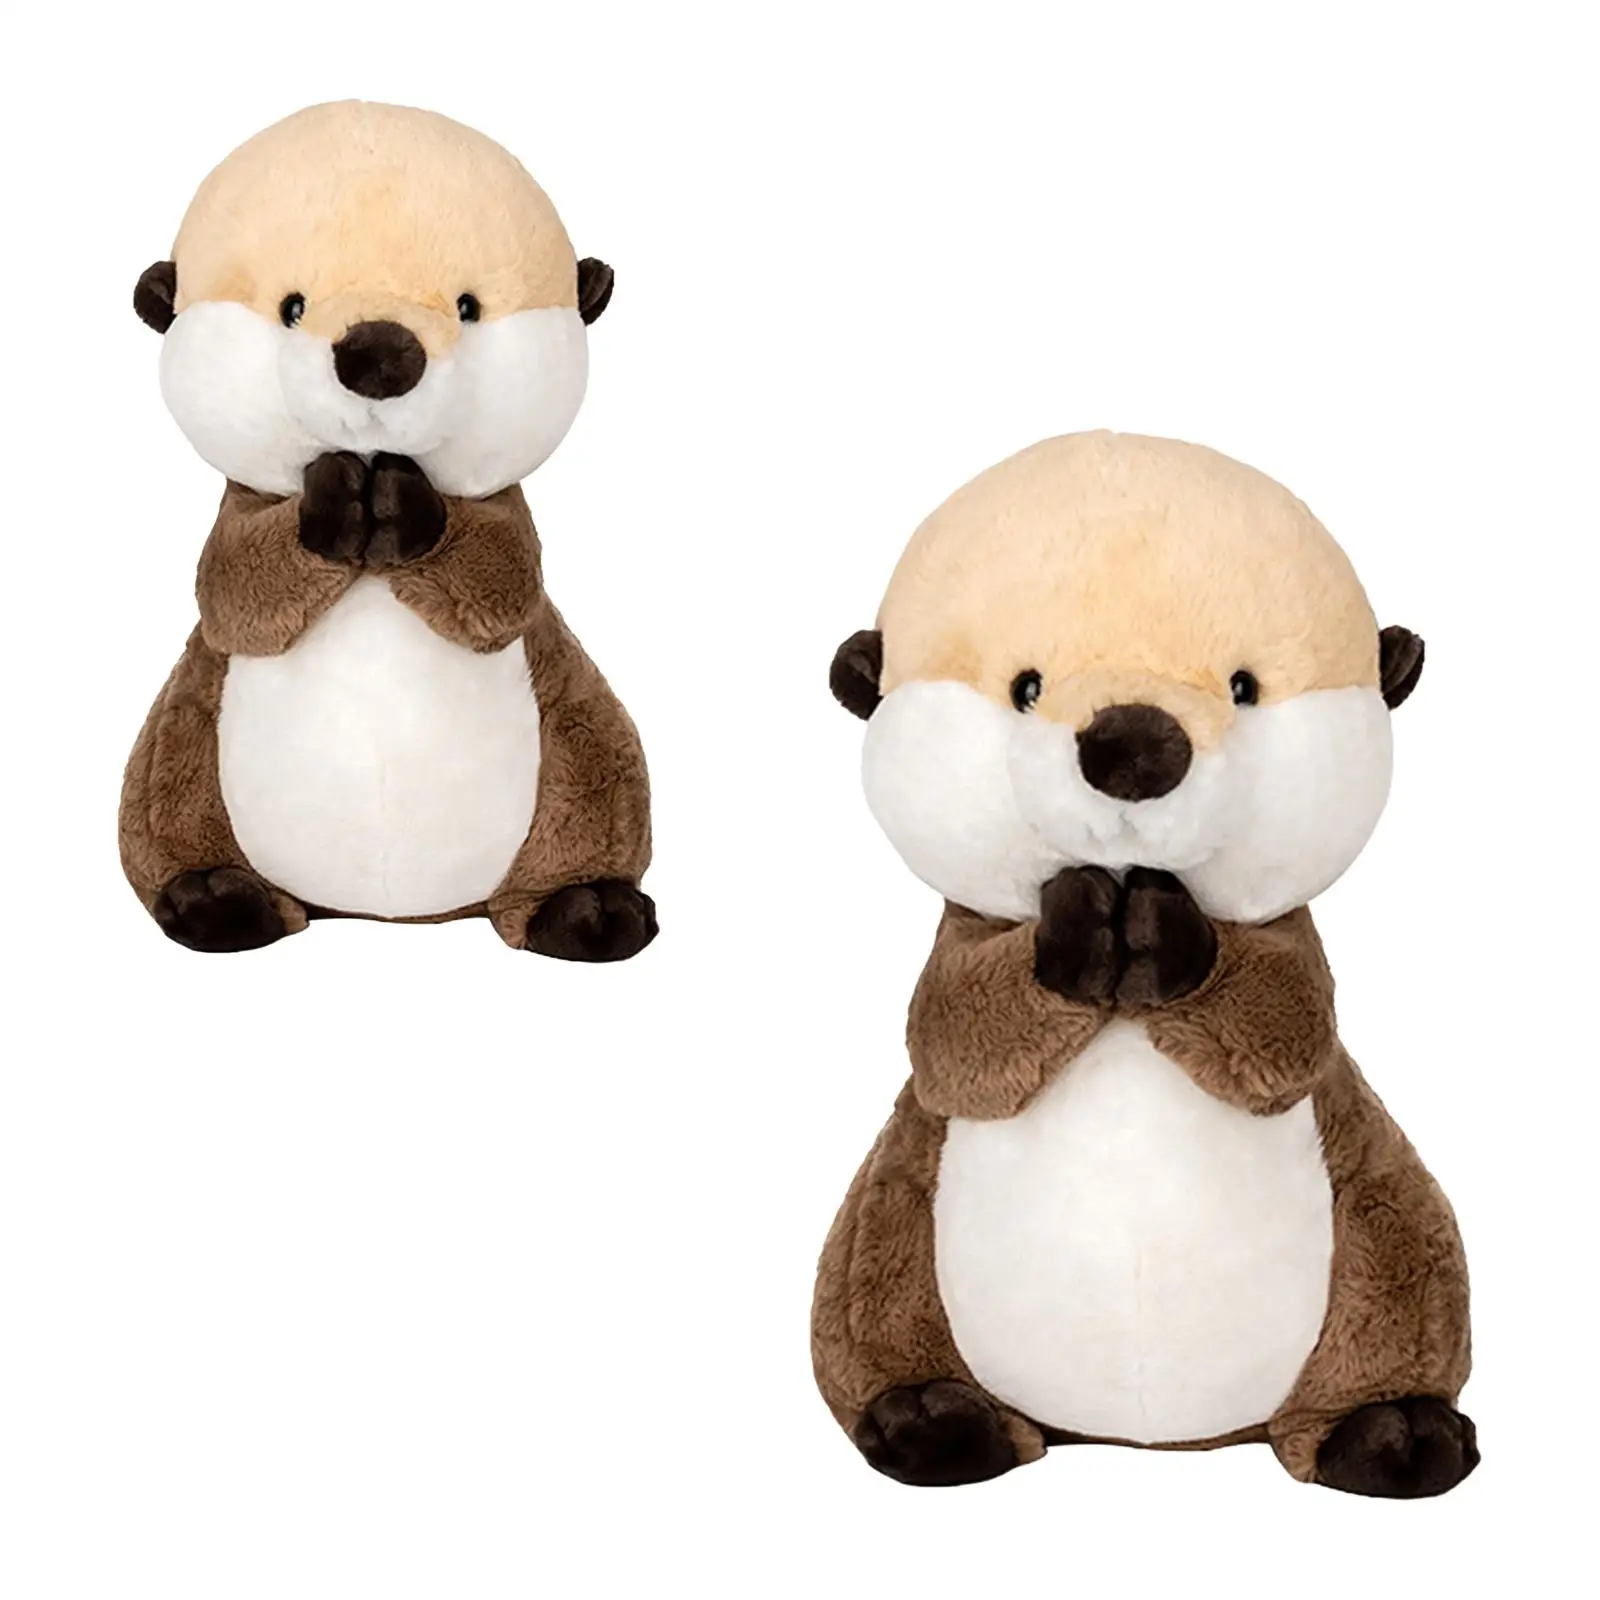 Otter Plush Toys Realistic Photo Props Early Education Toy Plush Stuffed Animal Otter Toys for Home Decor Kids Birthday Gifts